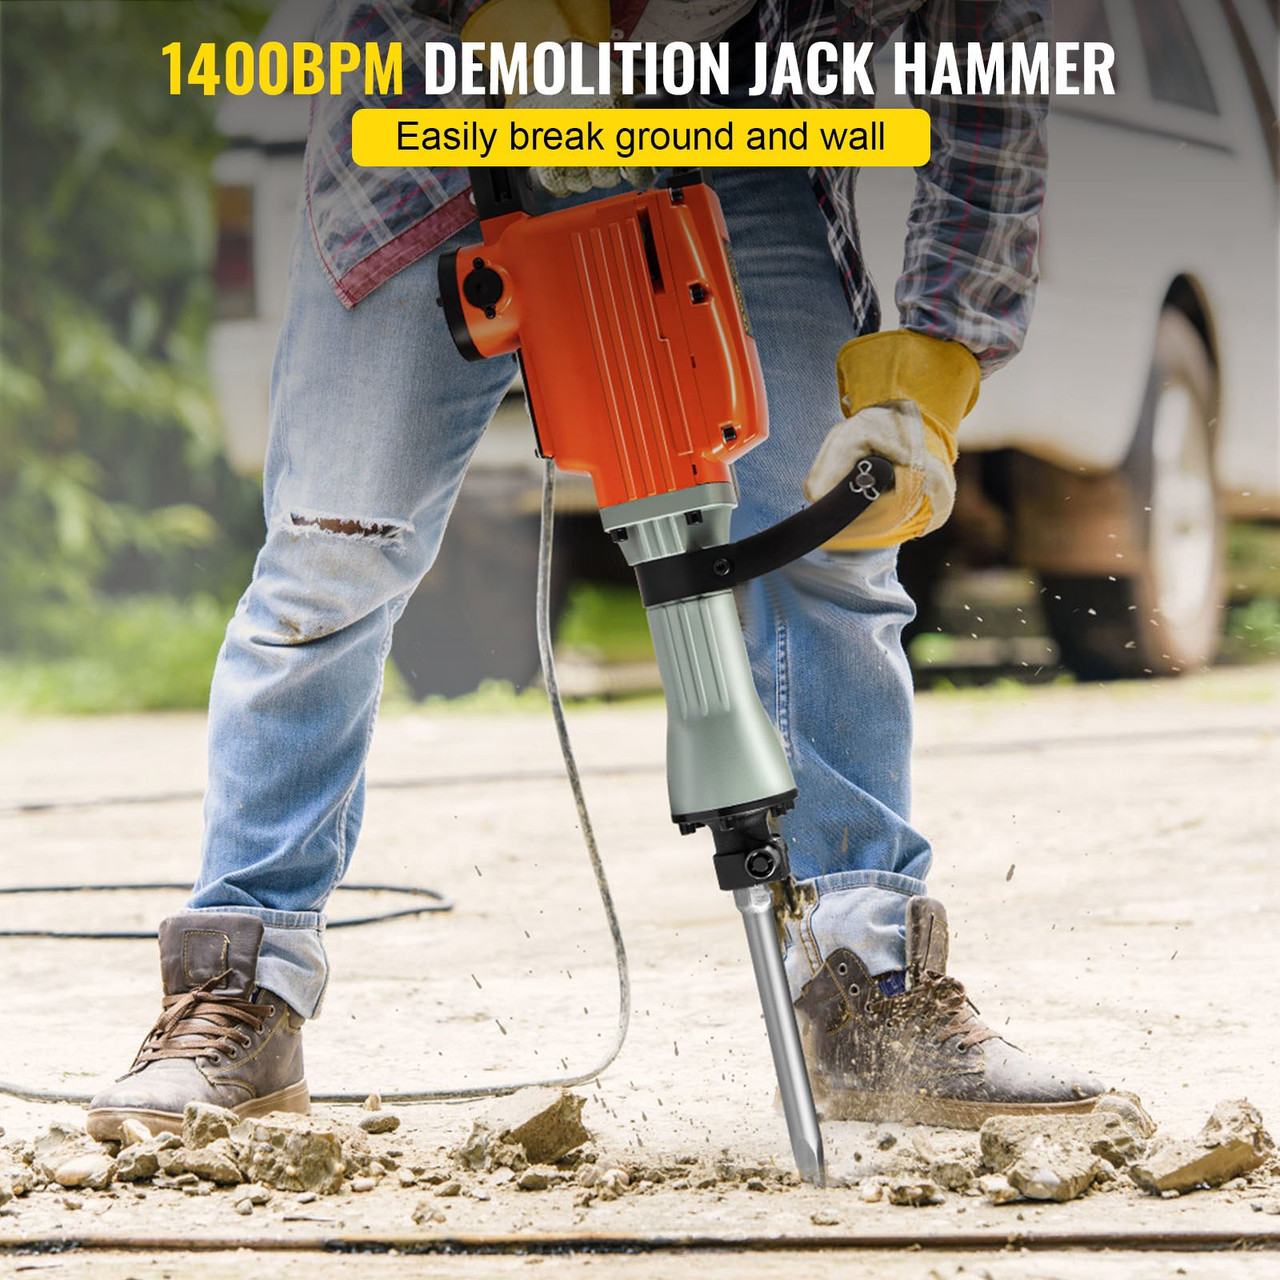 Industrial  Electric Demolition Hammer Concrete Breaker 3600W Jack Hammer 1400 BPM Heavy Duty, 4pcs Chisels Bit w/Gloves & 360øSwiveling Front Handle for Trenching, Chipping, Breaking Holes